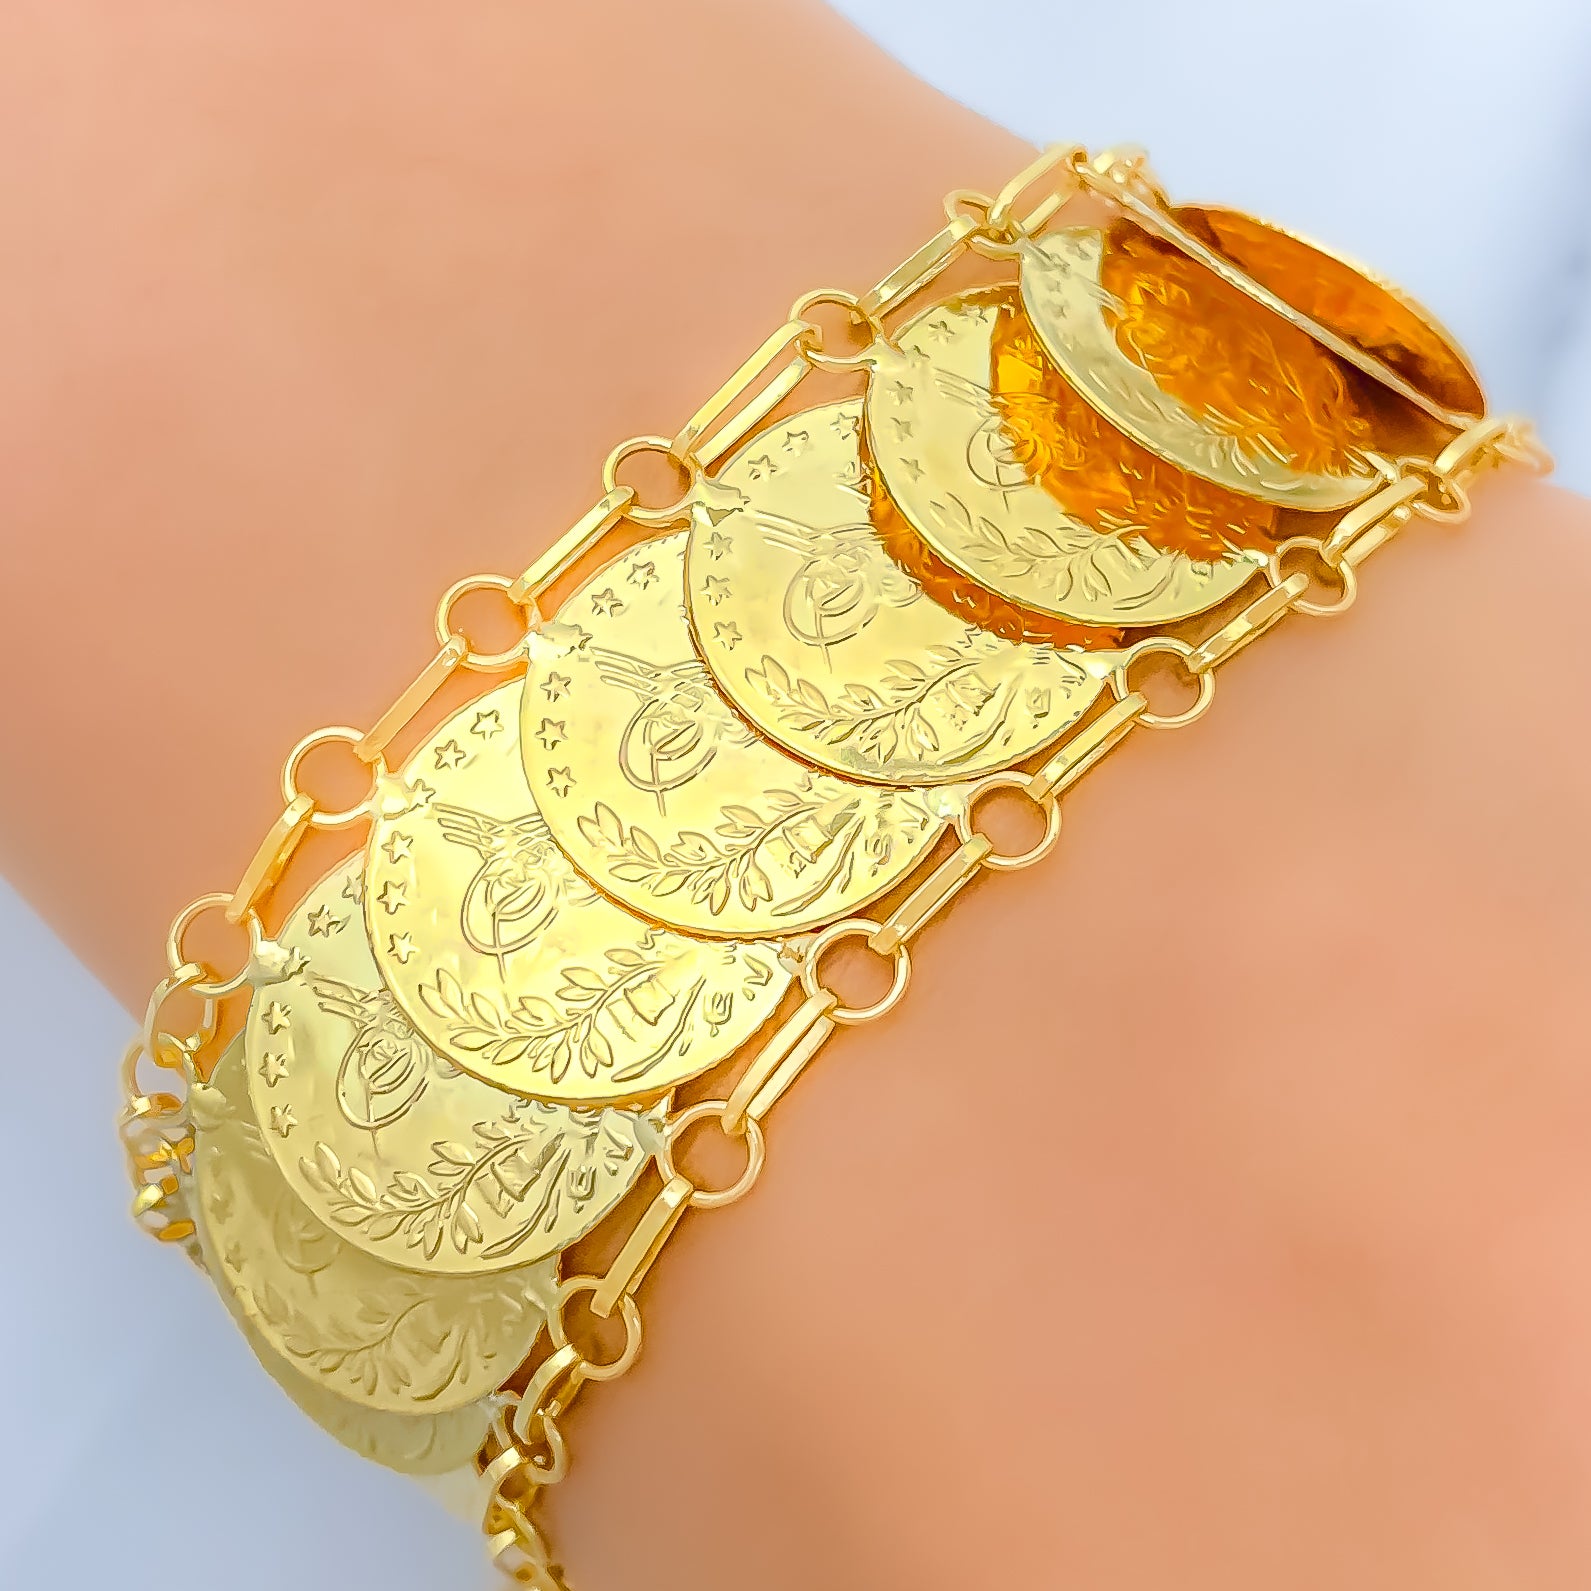 Shiny Coin 21k Gold Bracelet w/ Hanging Charm in 2023